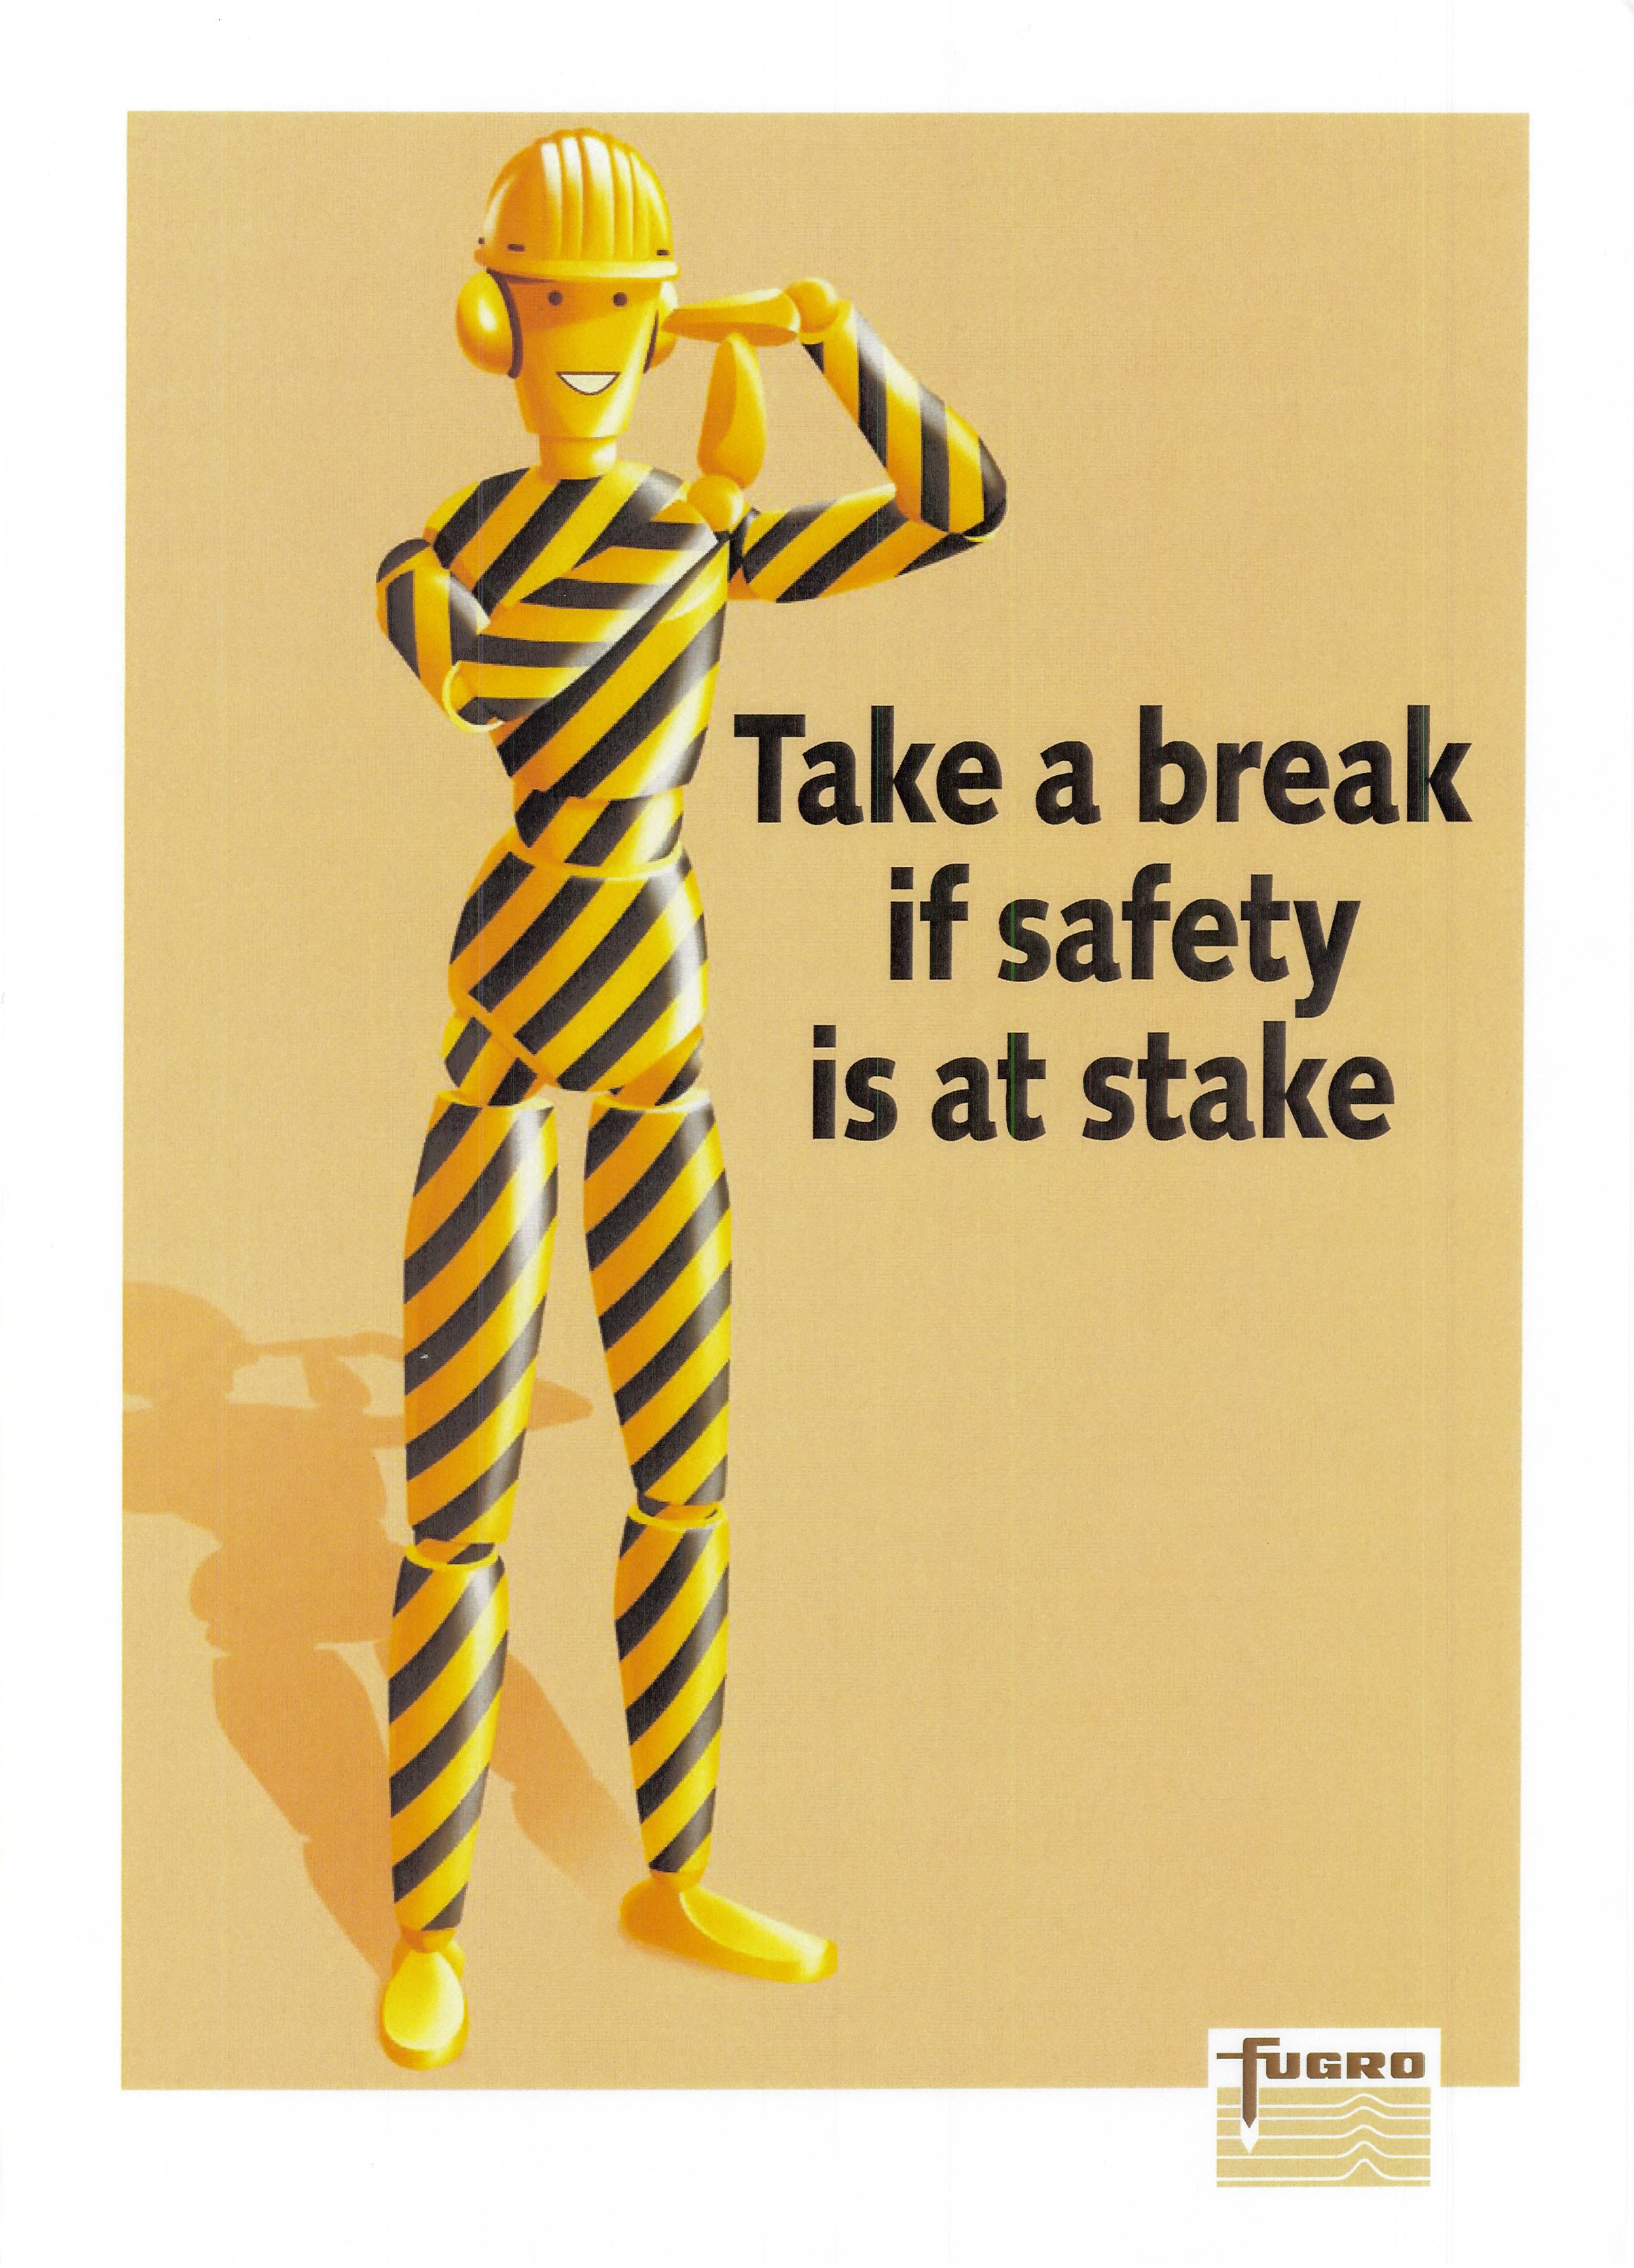  TAKE A BREAK IF SAFETY IS AT STAKE FUGRO